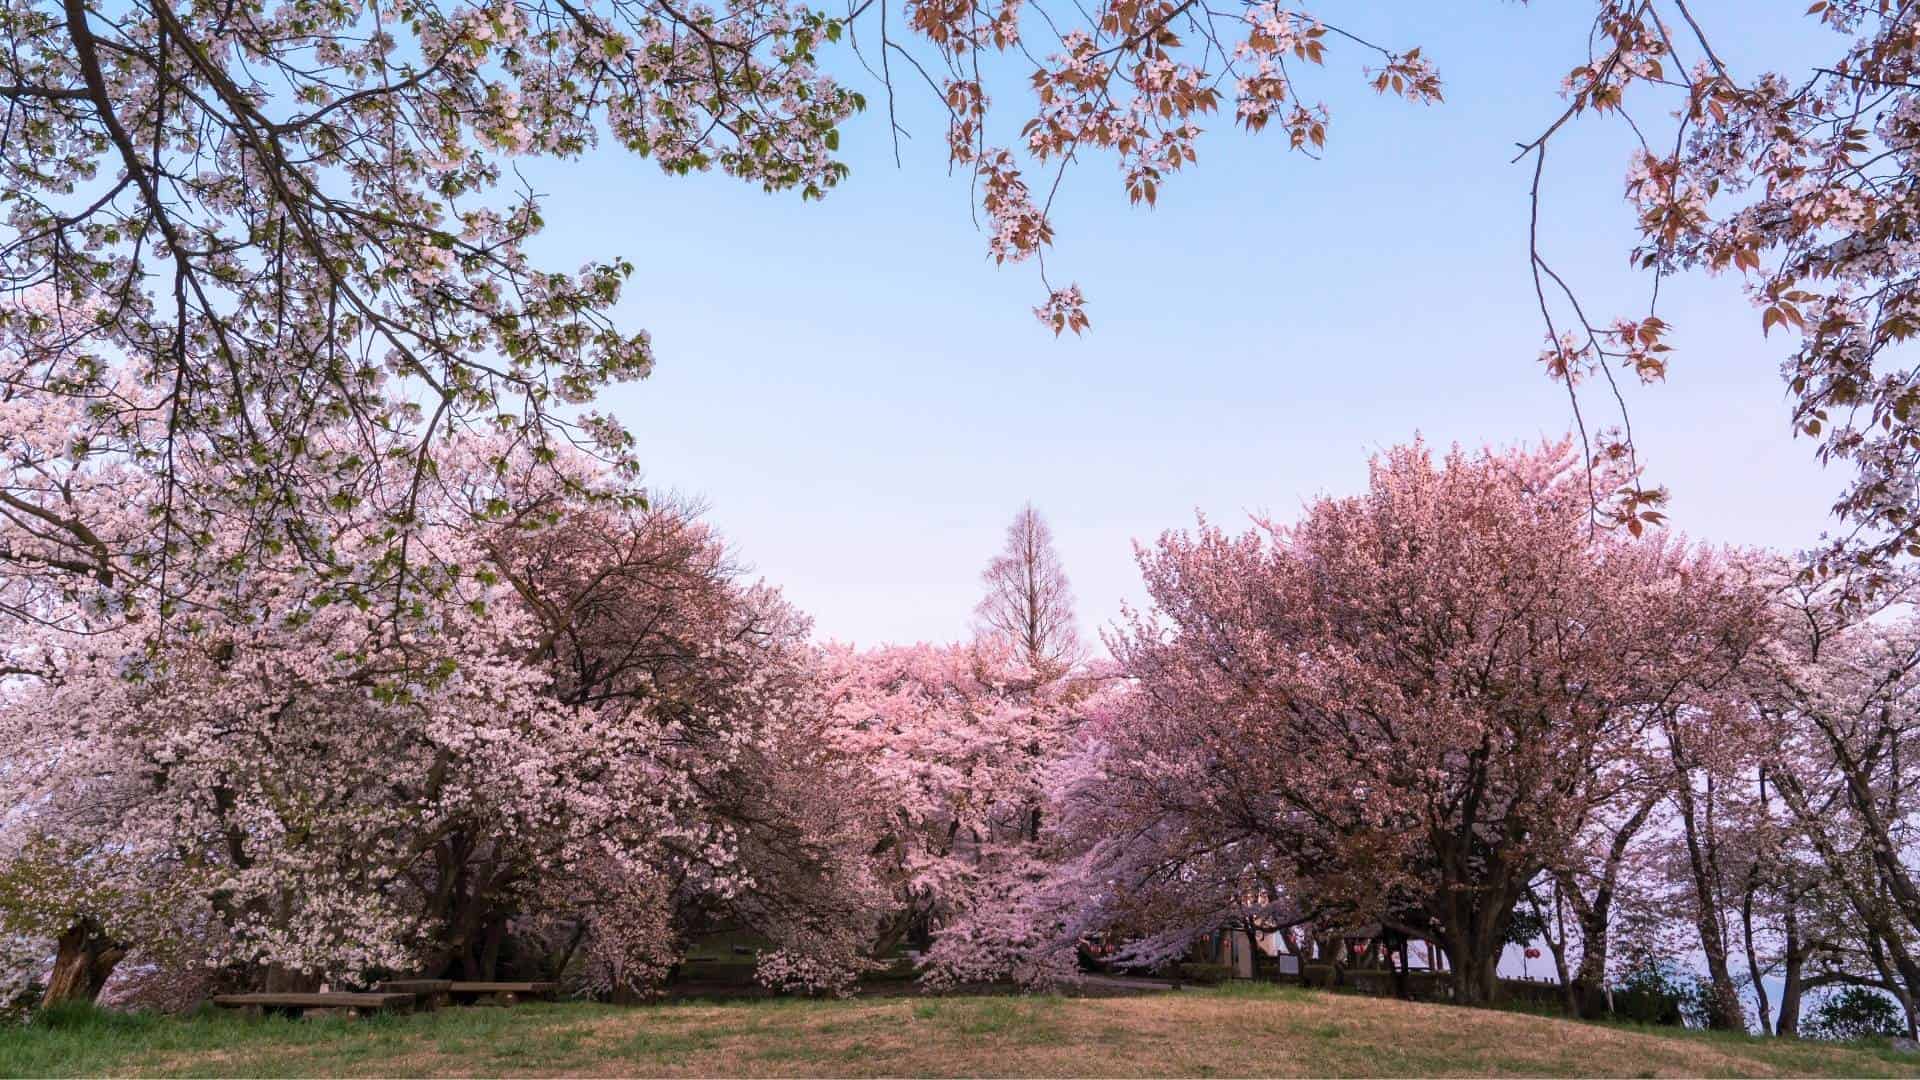 Where to see cherry blossom in Tokyo 11 best cherry blossom spots not to miss